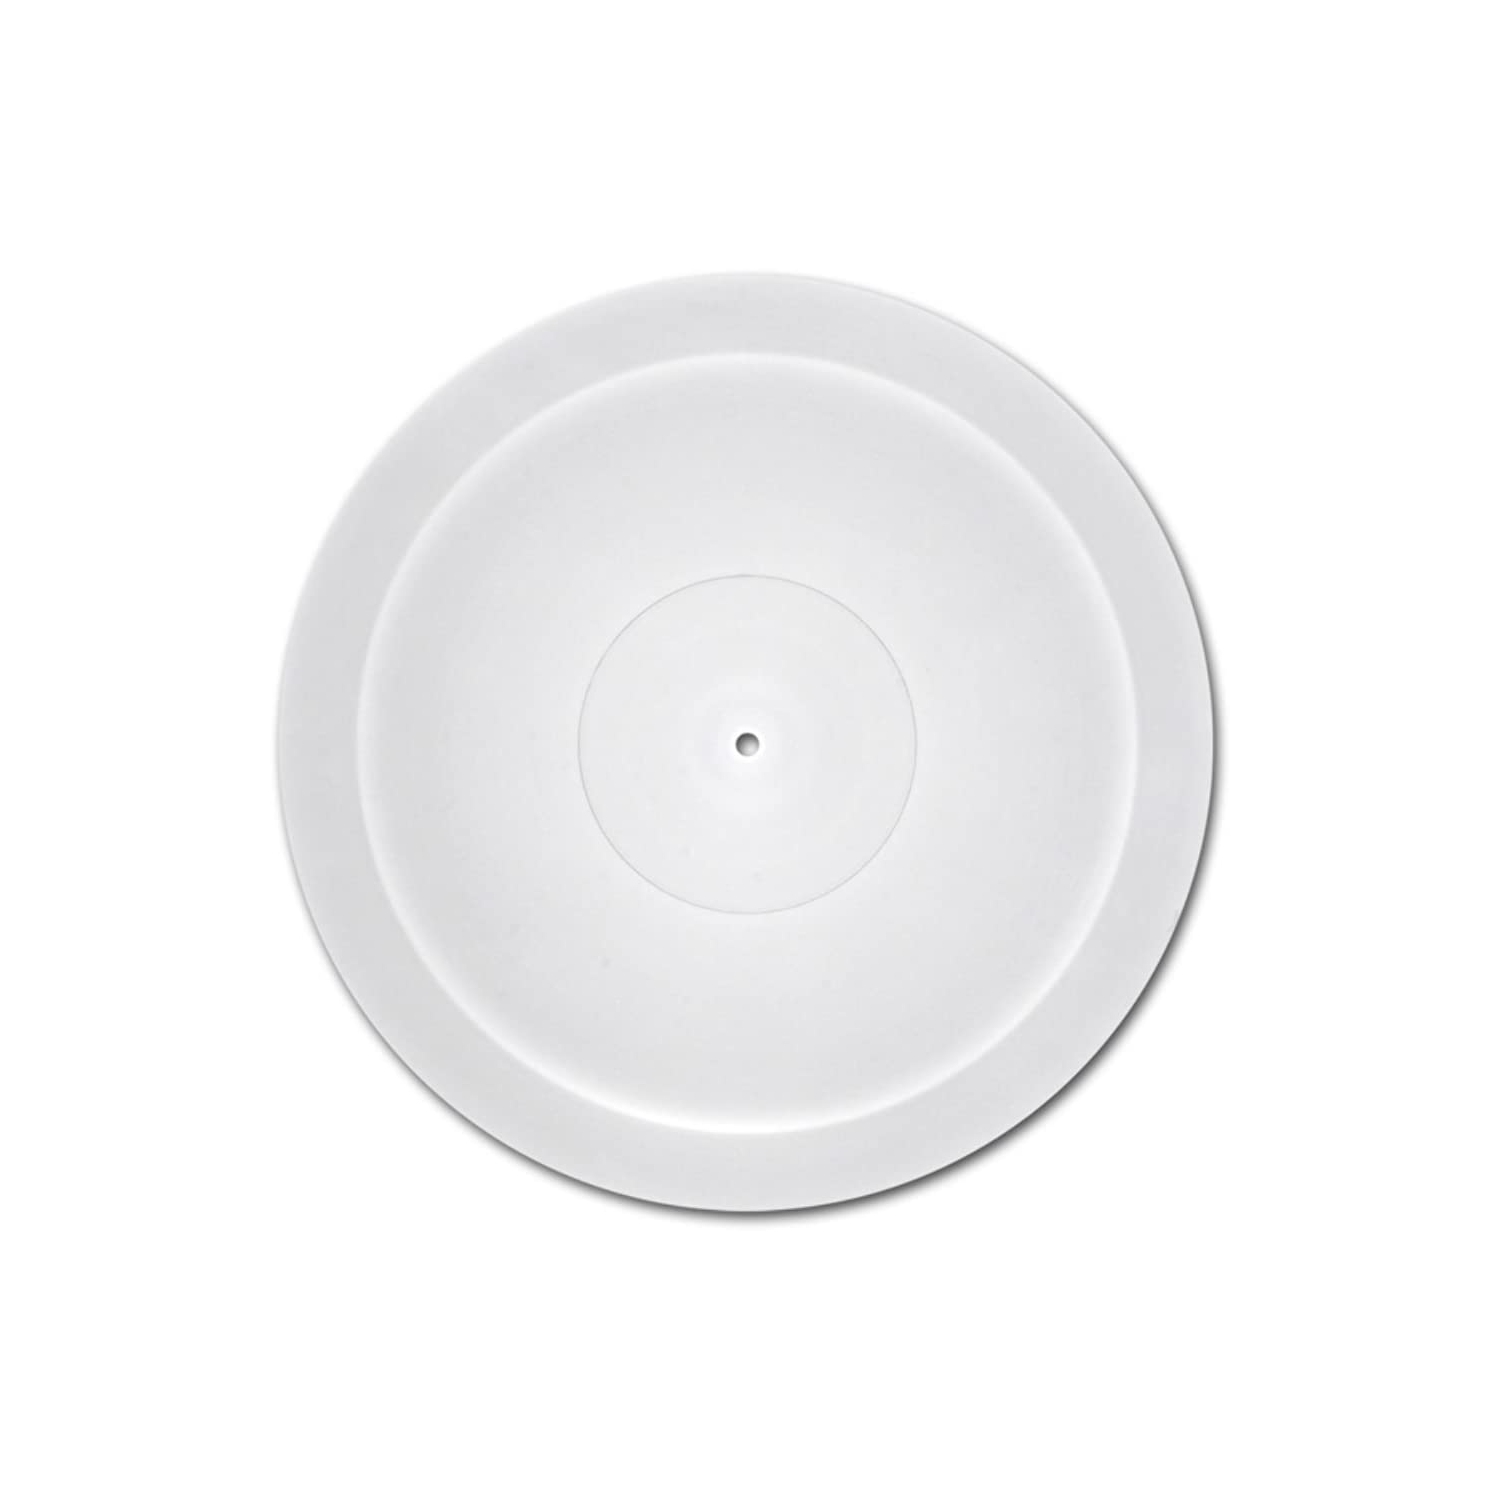 Pro-Ject Acryl It PJ50439603 Turntable platter upgrade-/Substitutes metal platter/Suitable for Debut and 1Xpression turntables